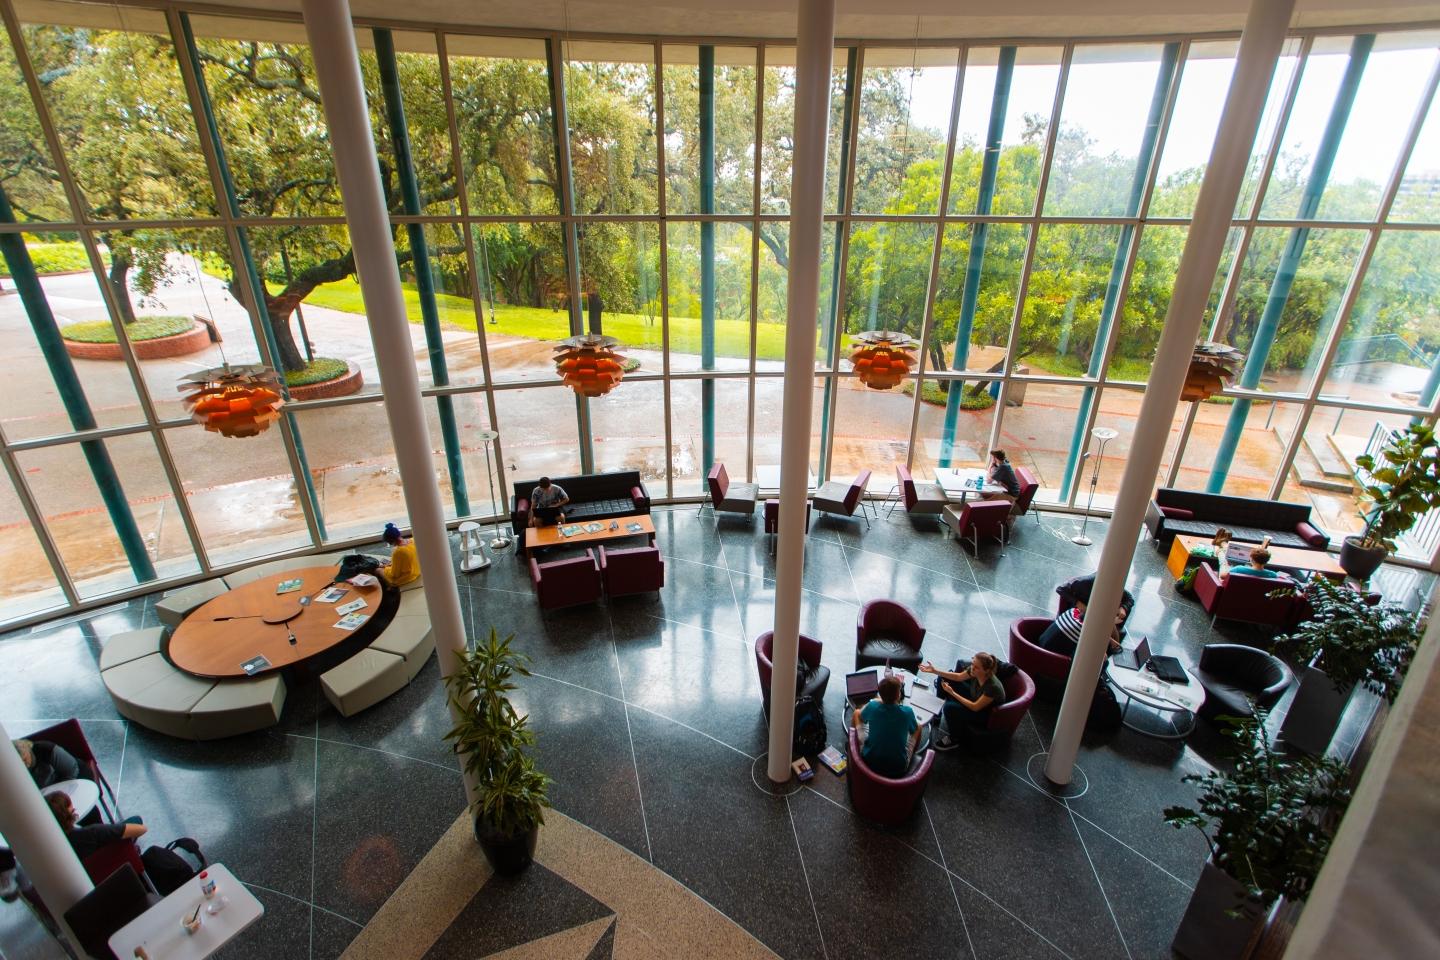 view of the Coates Student Center lounge area from the second story balcony